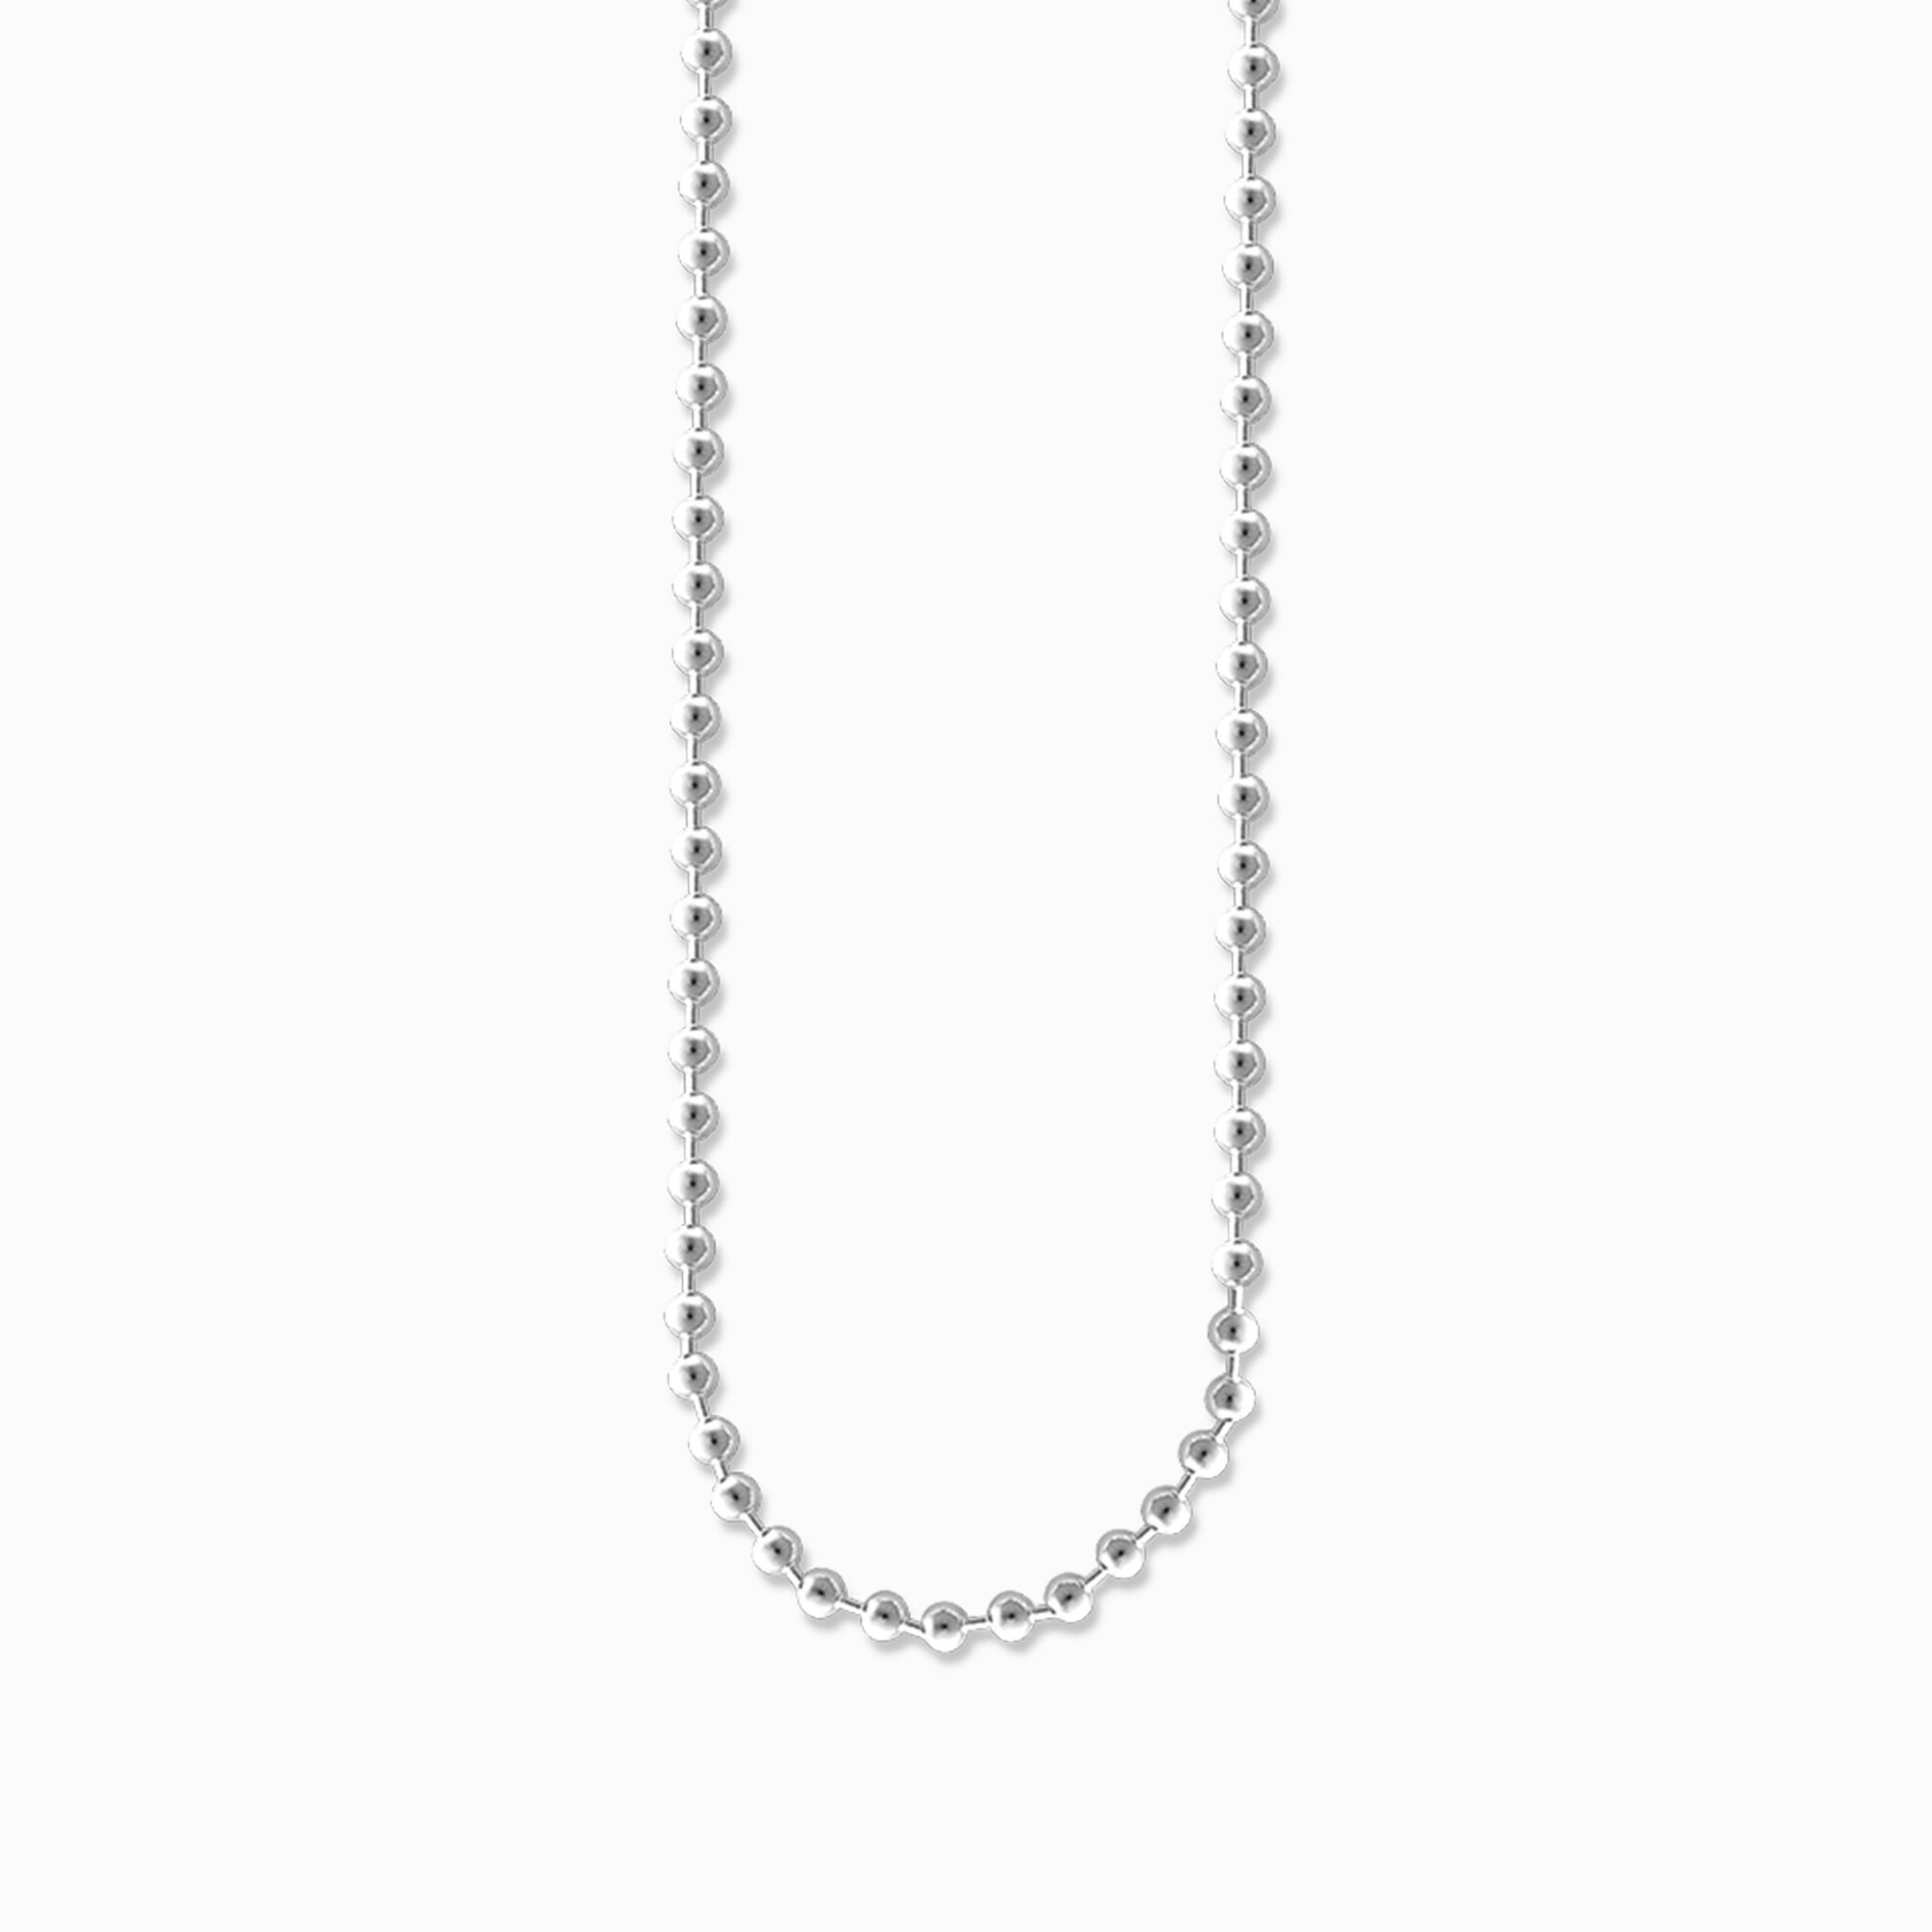 Ball chain from the  collection in the THOMAS SABO online store